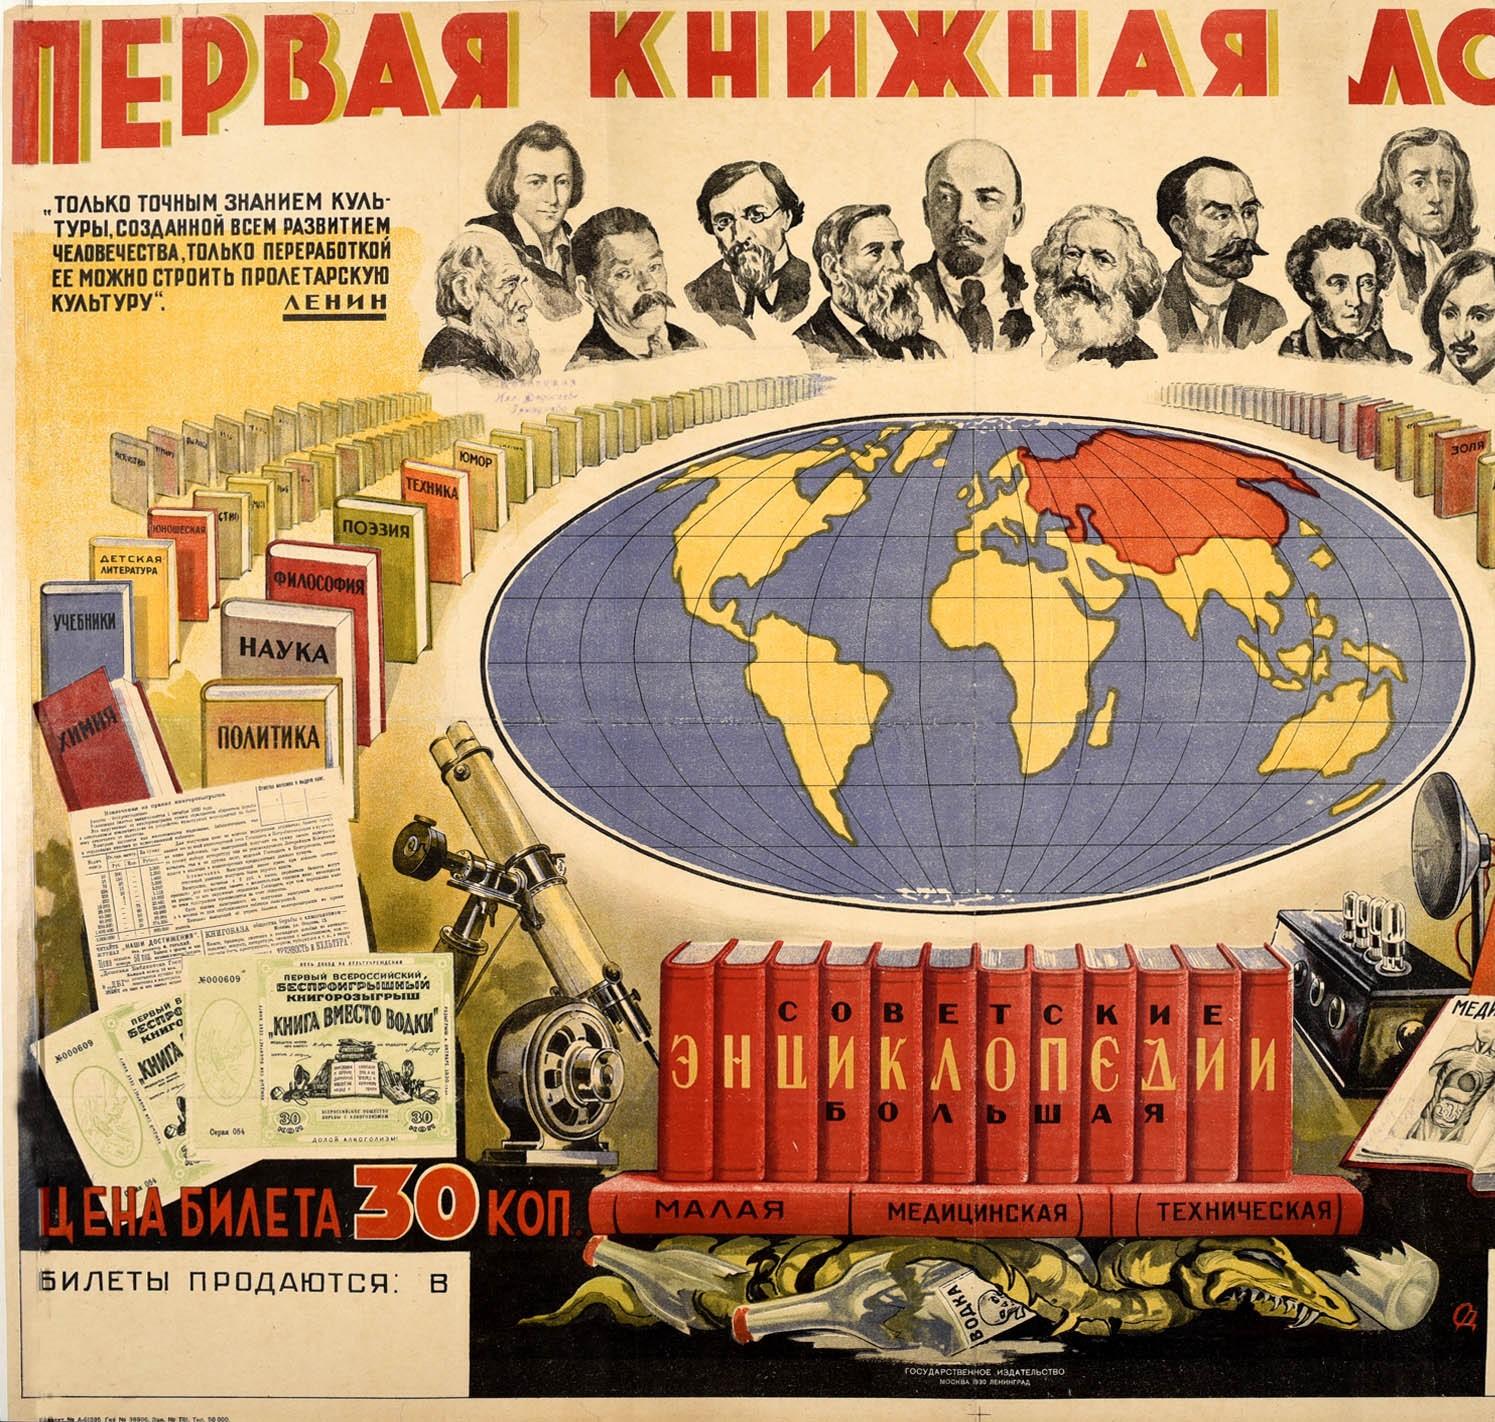 Original vintage Soviet propaganda poster promoting the first issue of a book lottery organised by the State Publishing House GIZ in cooperation with the Society for the Suppression of Alcoholism as part of government led campaign to battle